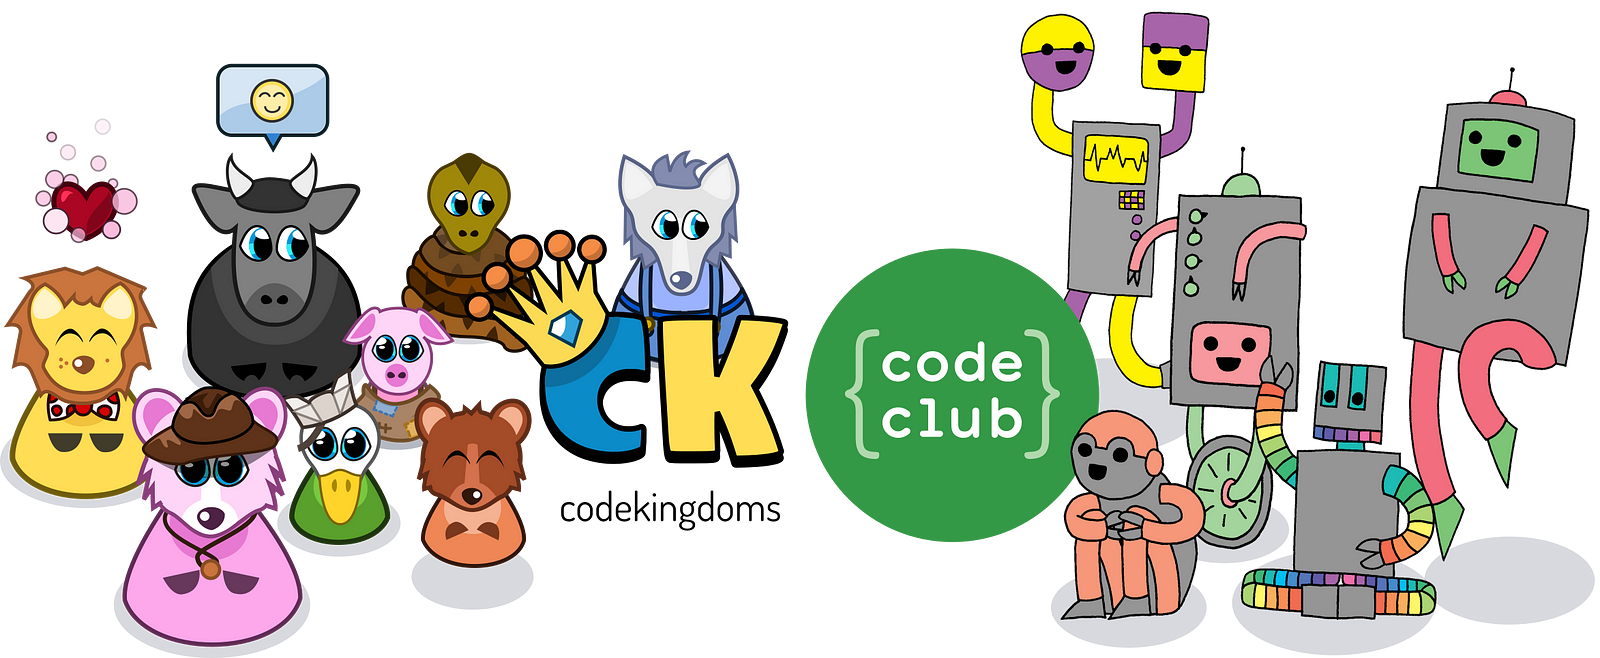 Code Kingdoms Partners With Code Club Code Kingdoms Medium - code kingdoms partners with code club